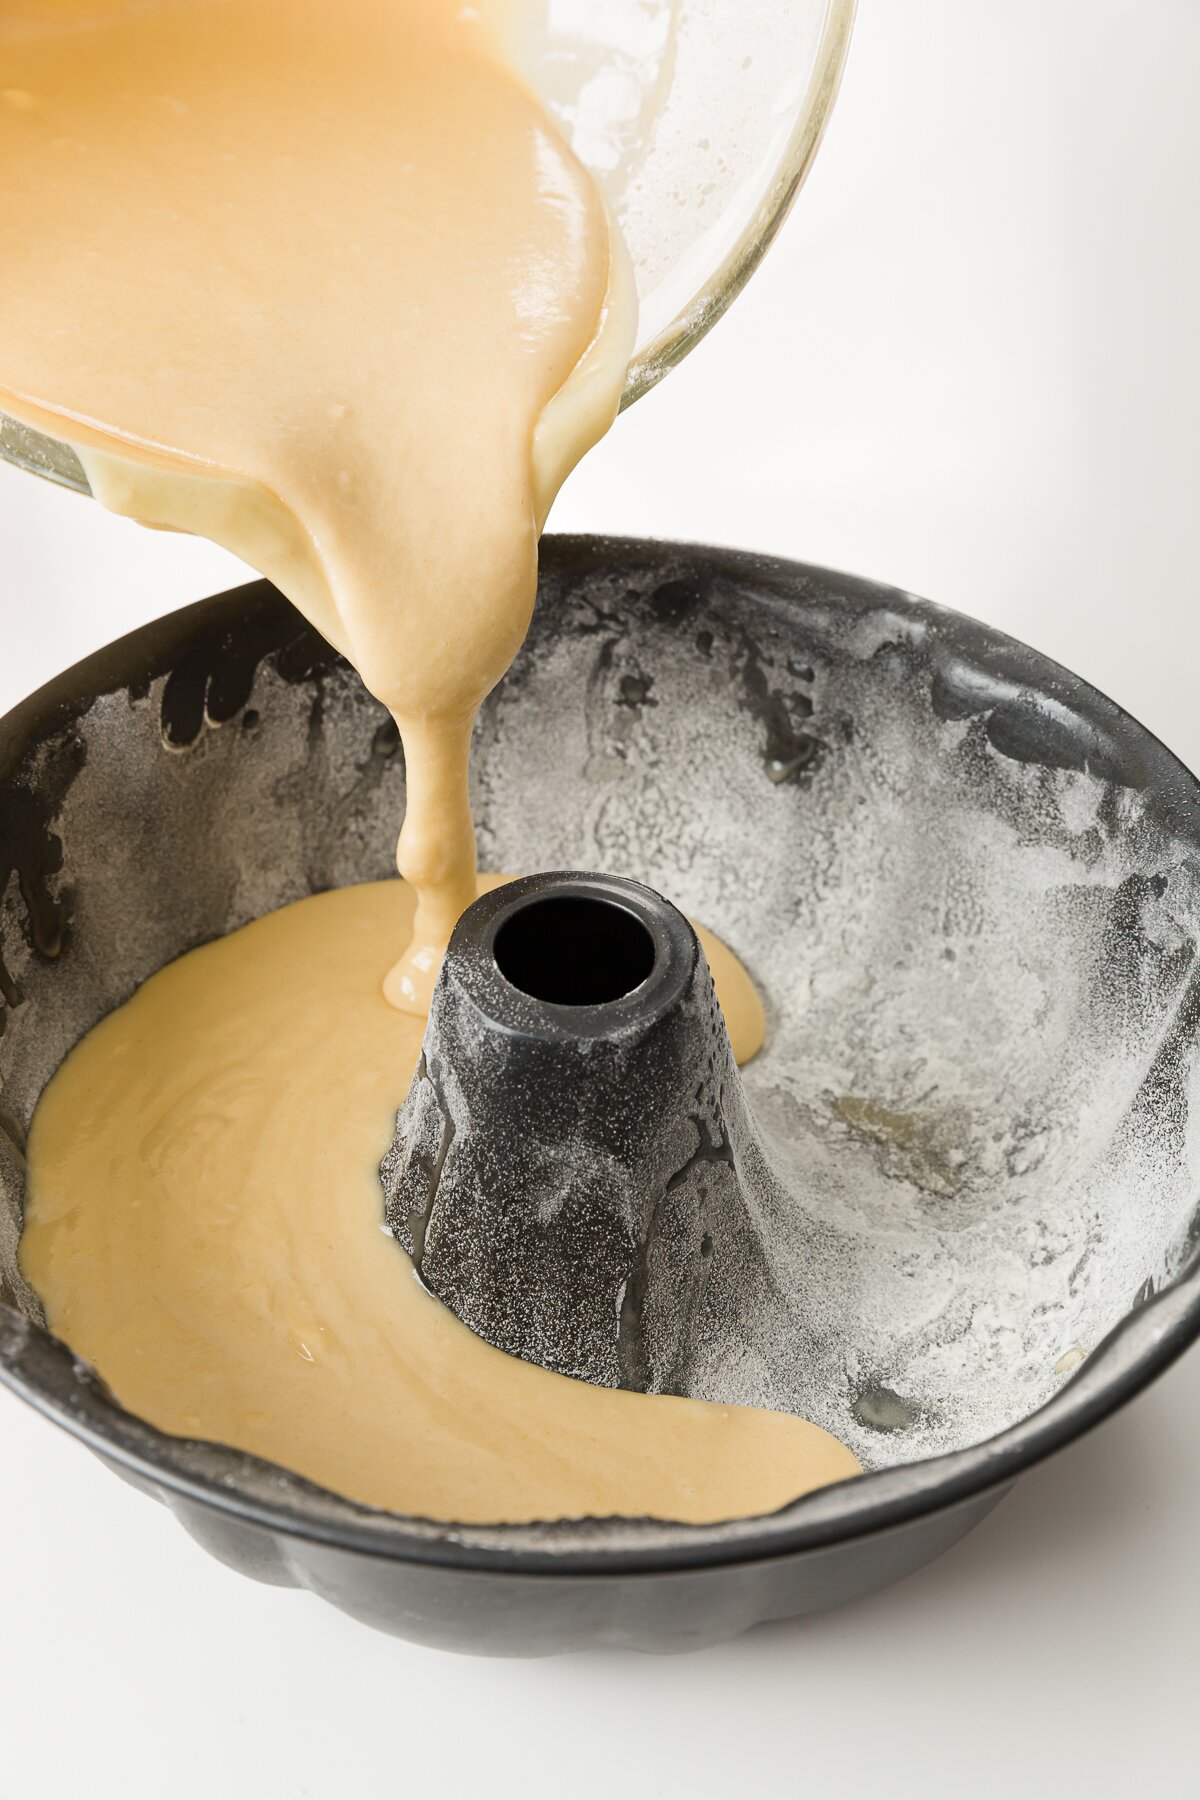 tight shot of Stef pouring batter into a Bundt pan